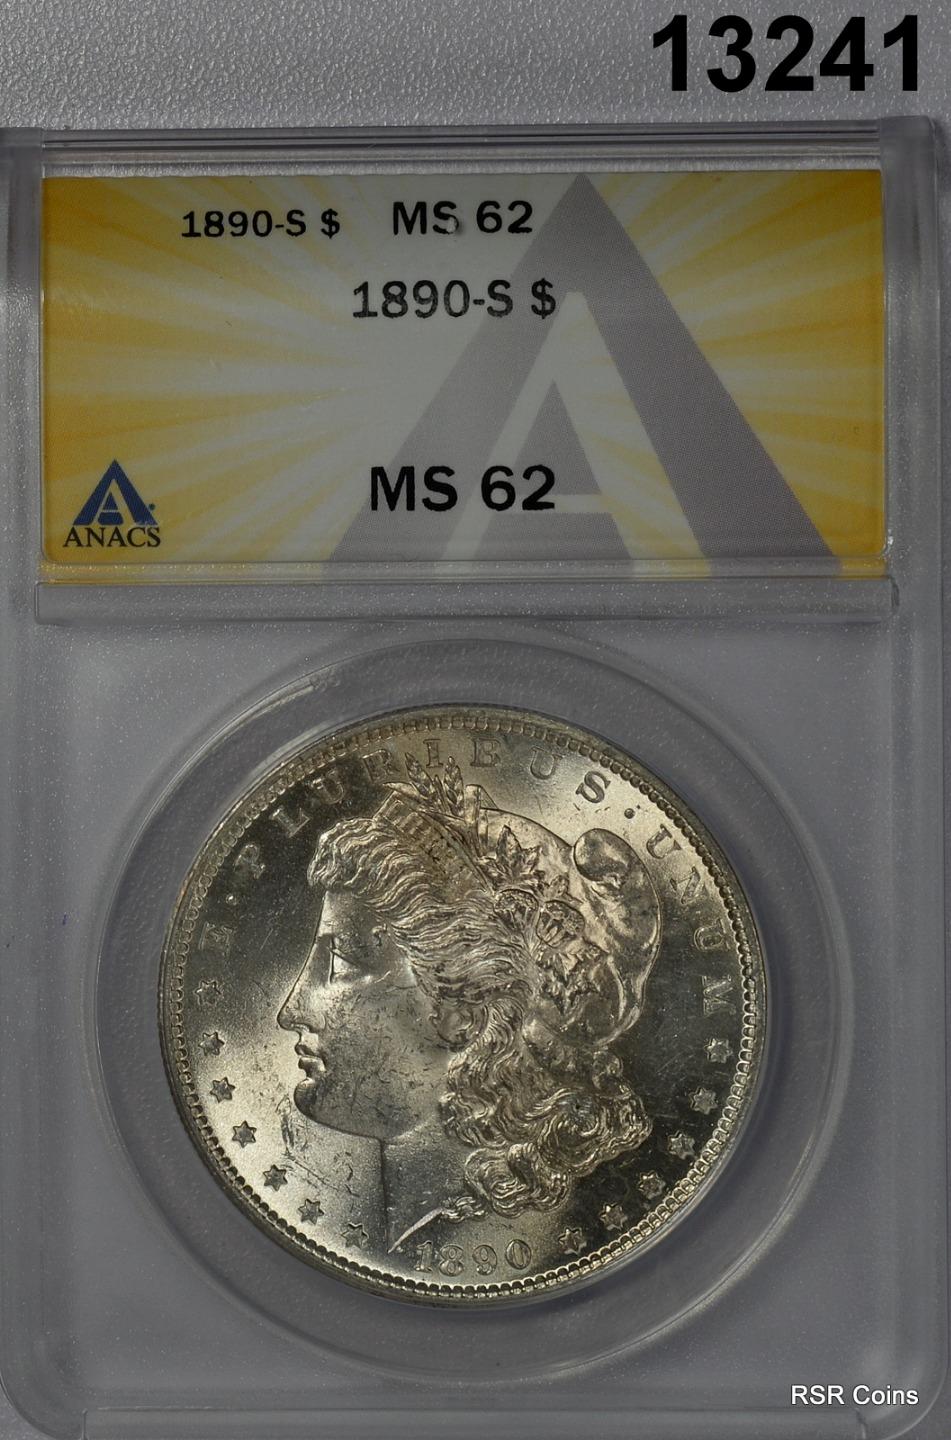 1890 S MORGAN SILVER DOLLAR ANACS CERTIFED MS62 LOOKS BETTER! WOW! #13241